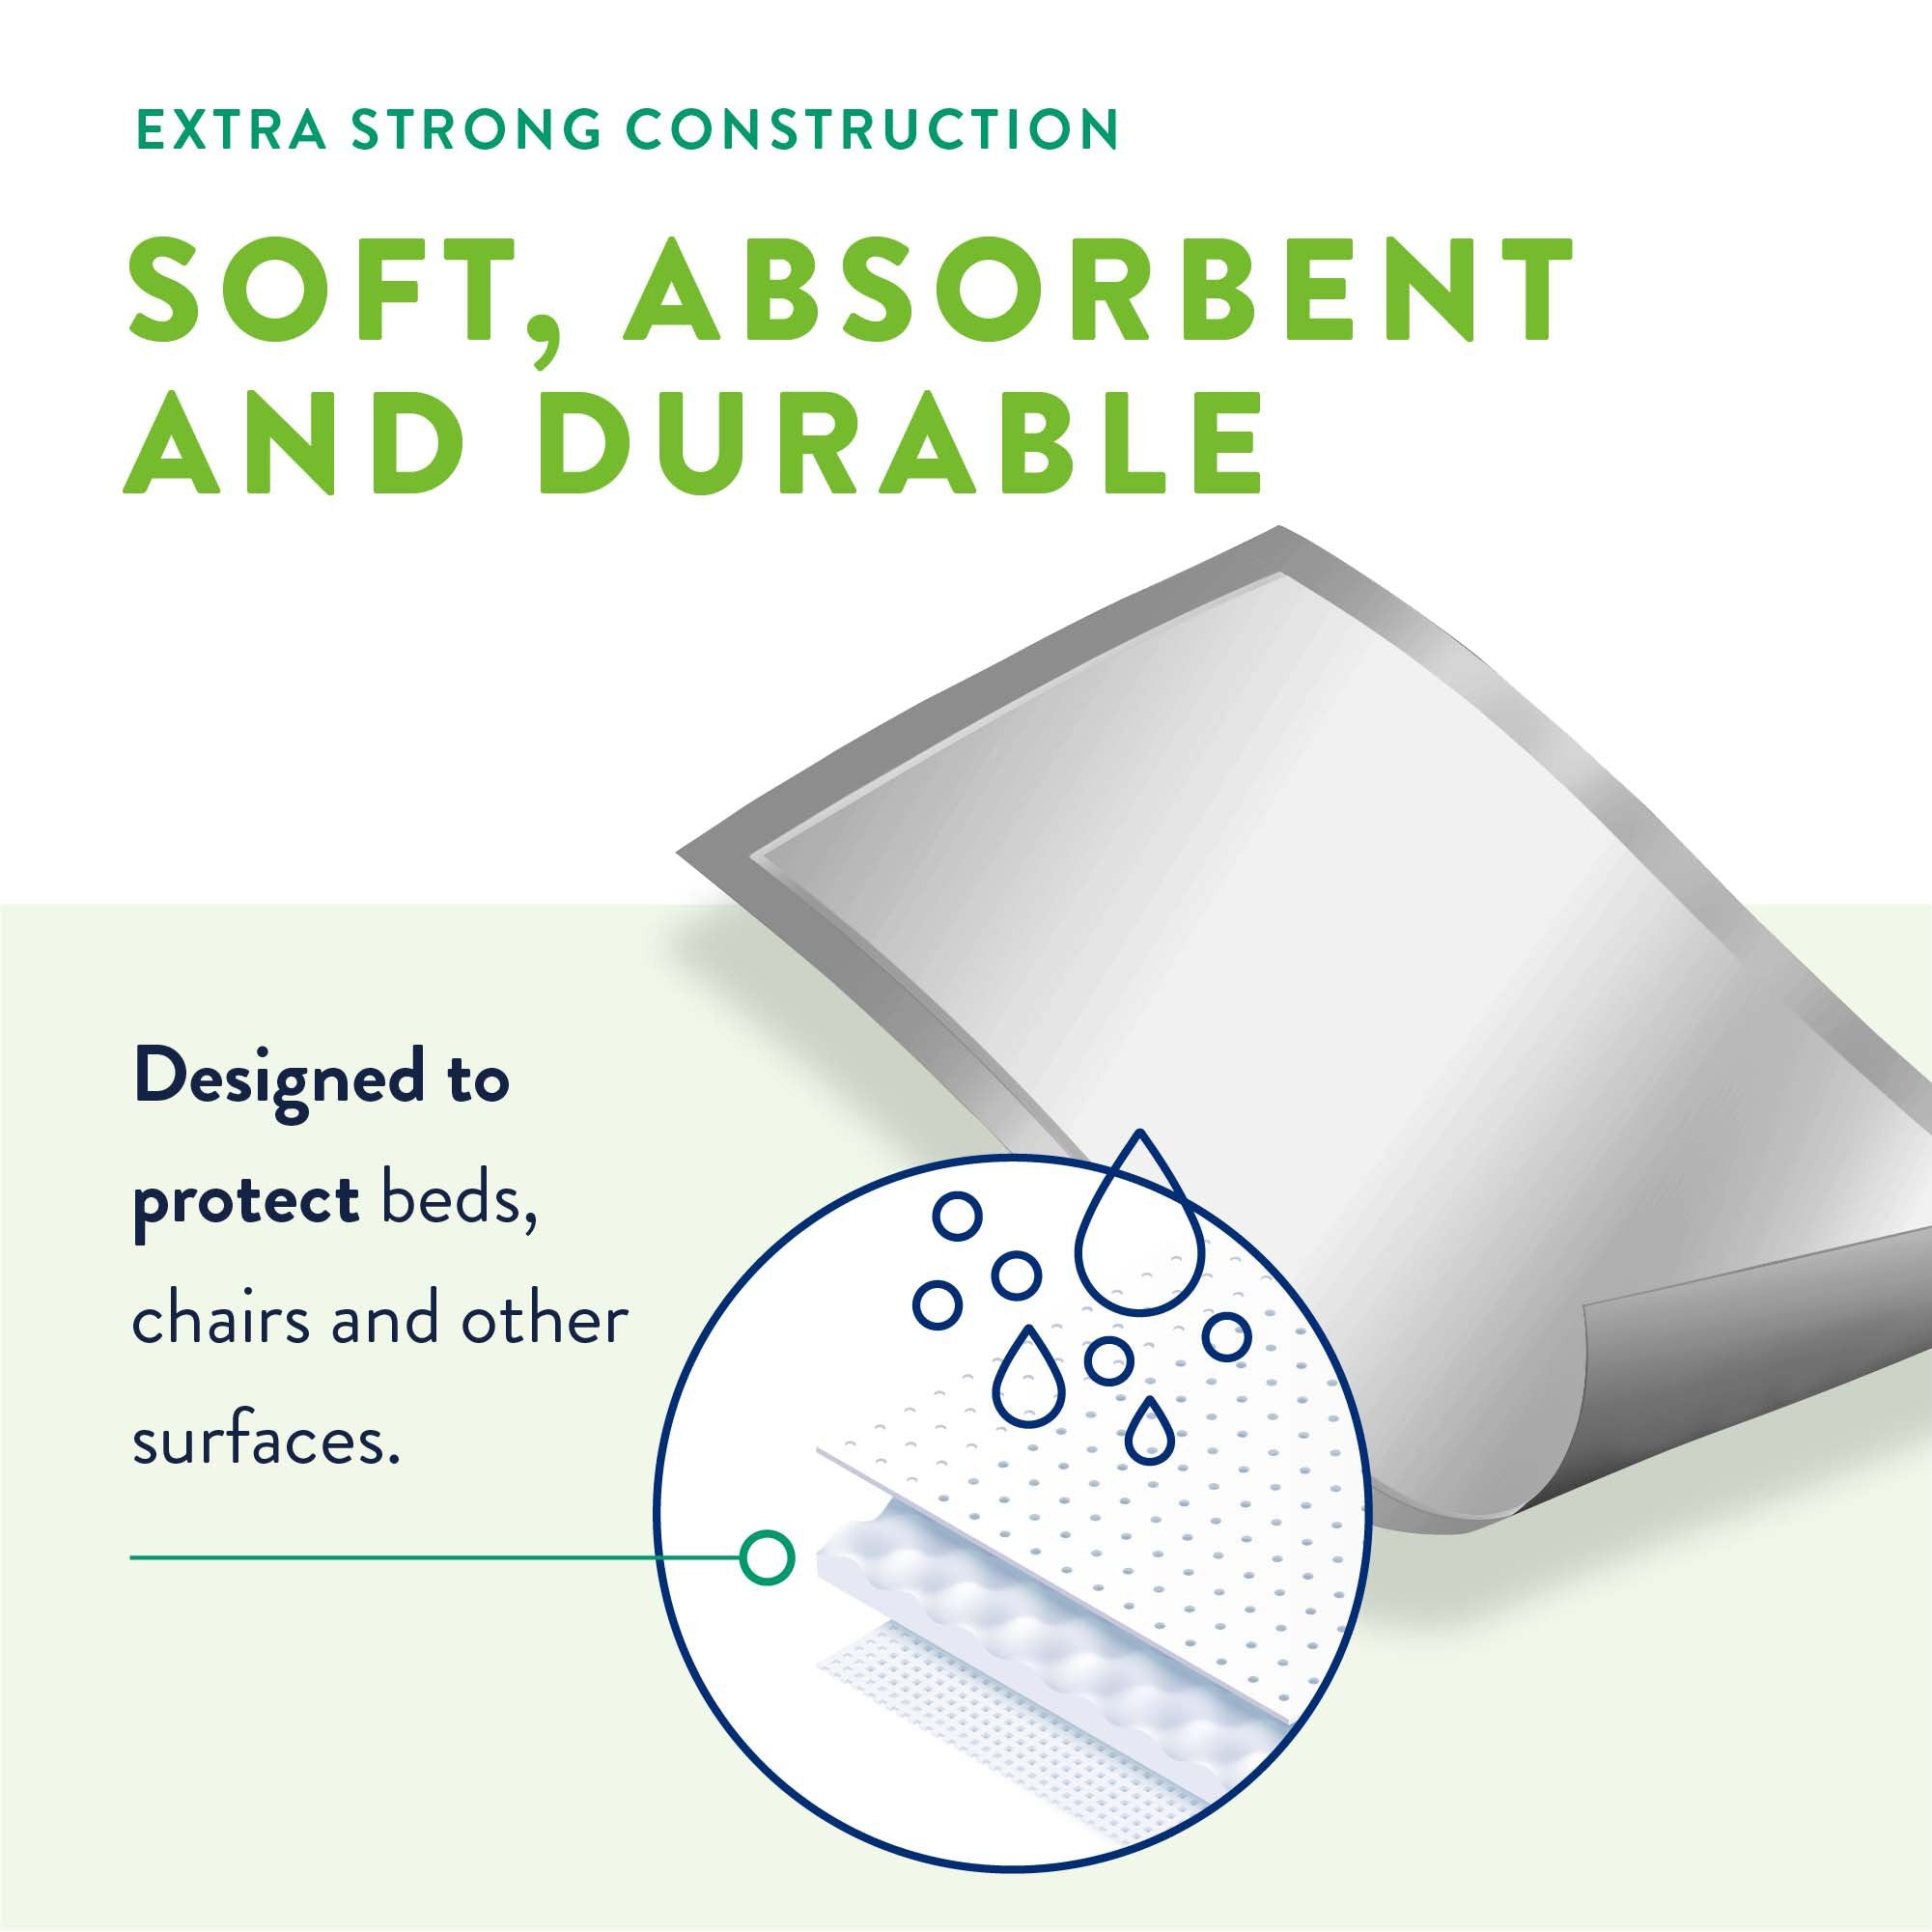 Disposable Underpad Prevail® Total Care™ 30 X 30 Inch Polyester Heavy Absorbency